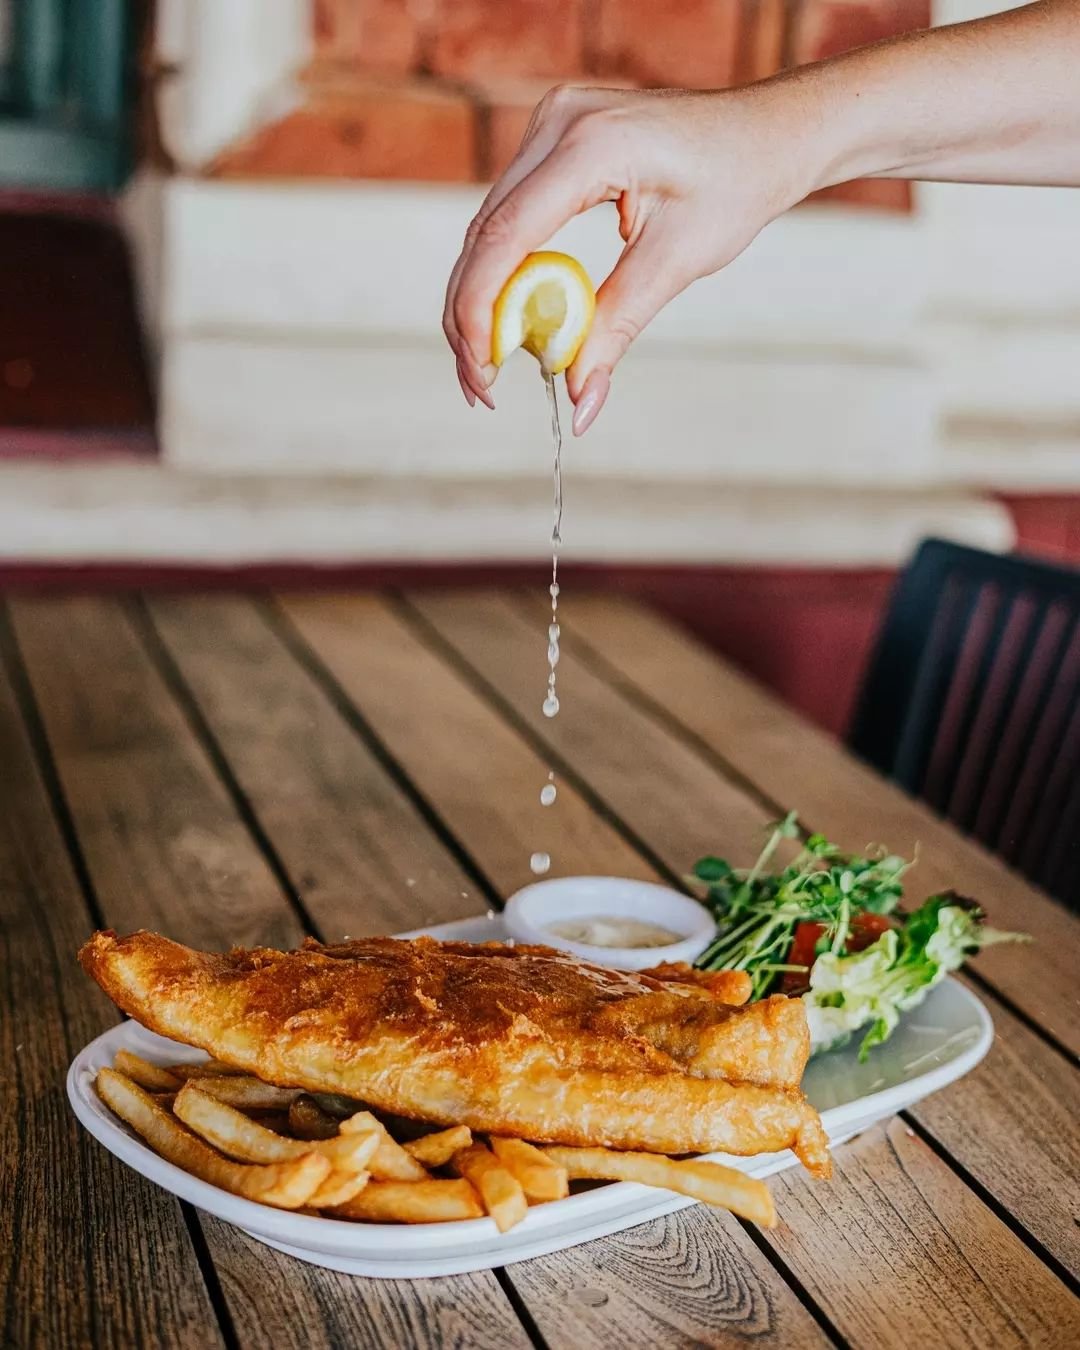 Join us tomorrow for our Fish &amp; Chips Special! The perfect Friday night deal for just $25.

For bookings click the link in our bio.